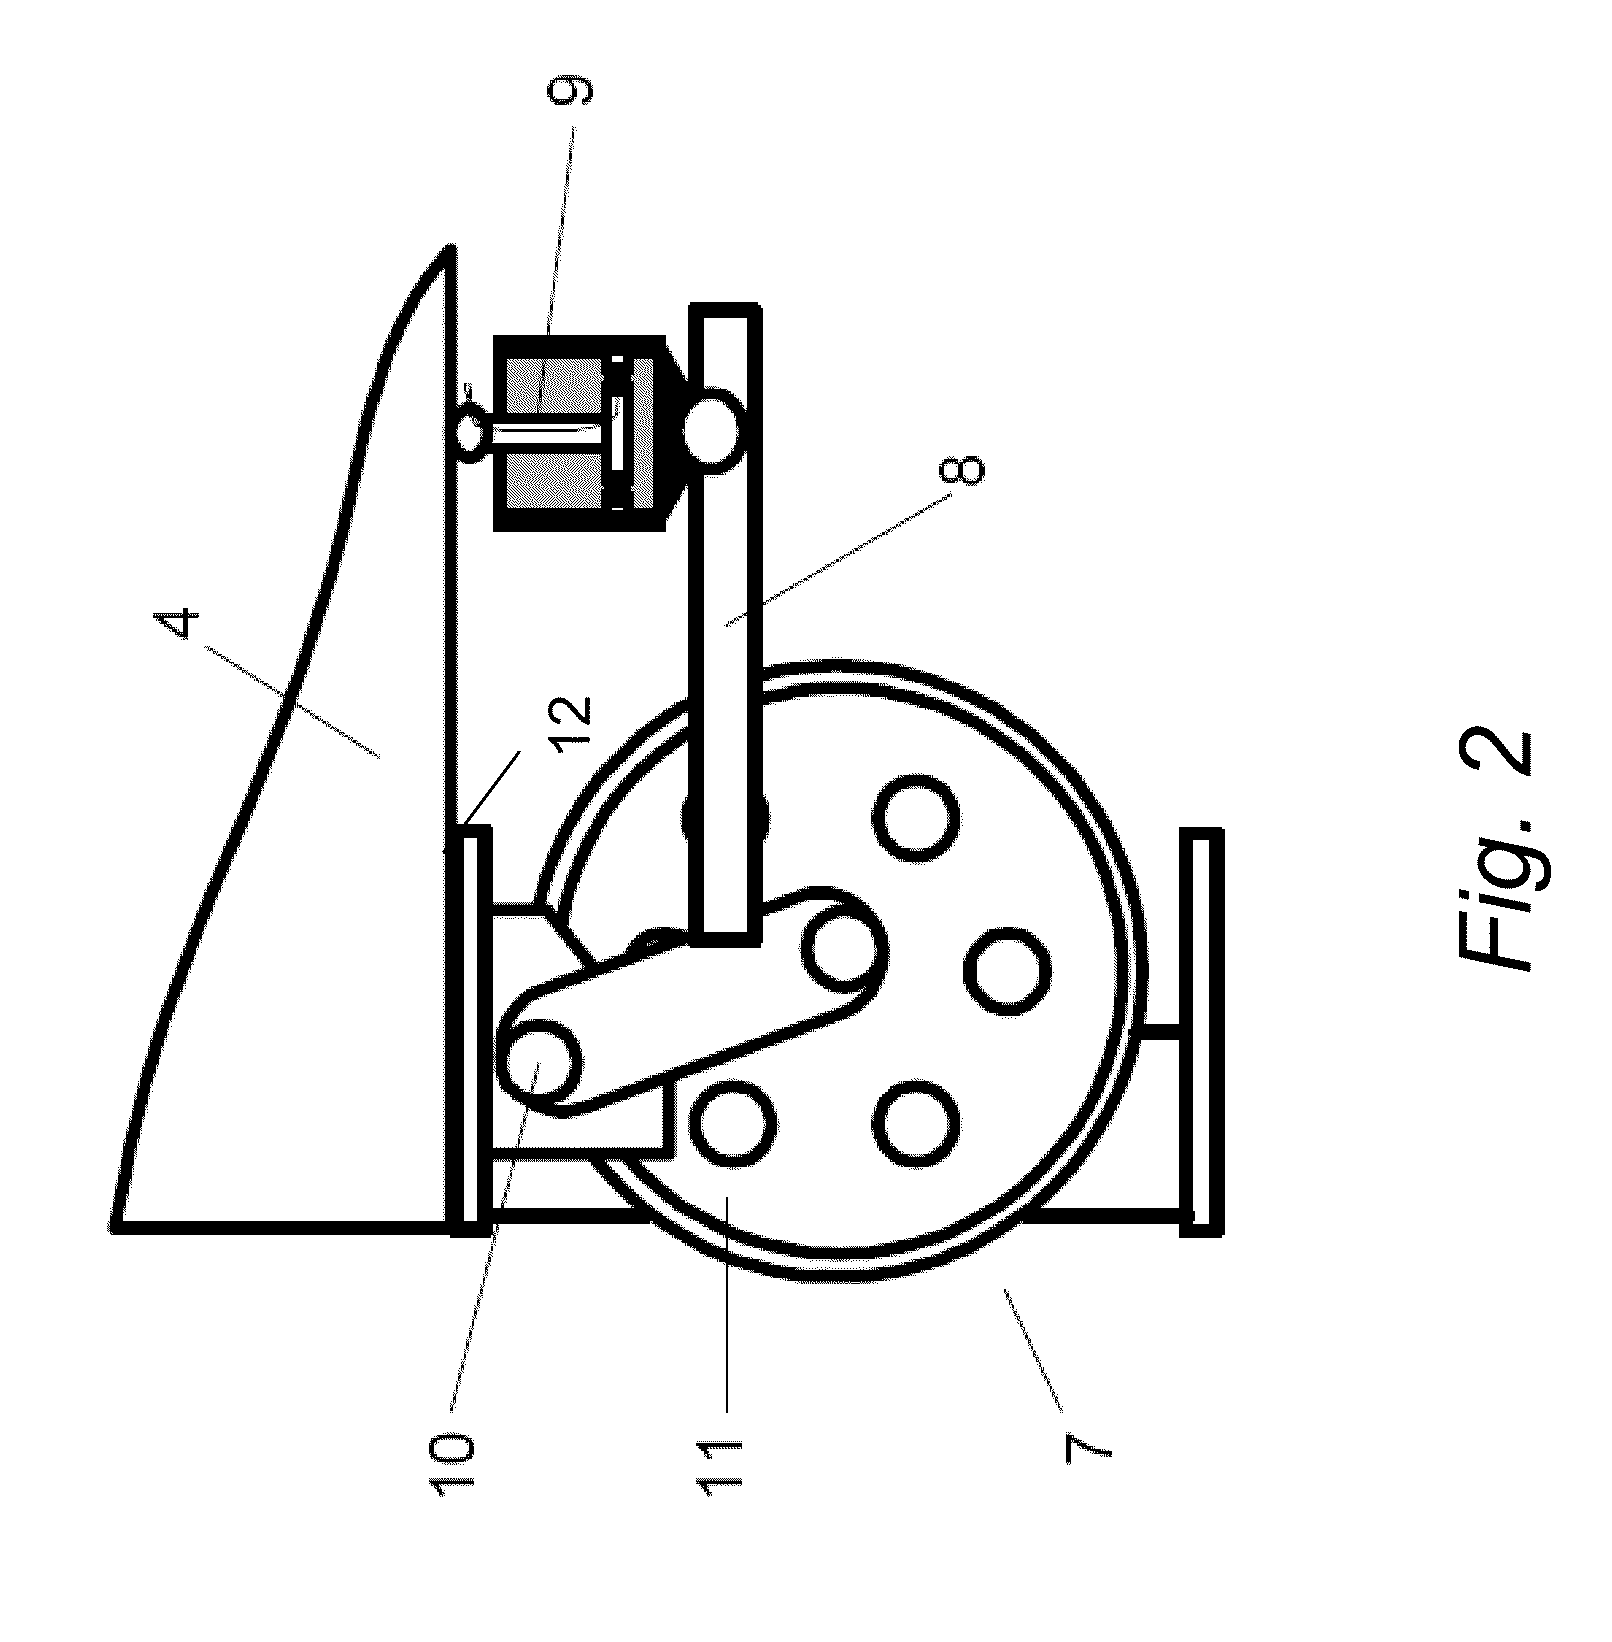 System and Method for Reducing Lateral Vibration in Elevator Systems